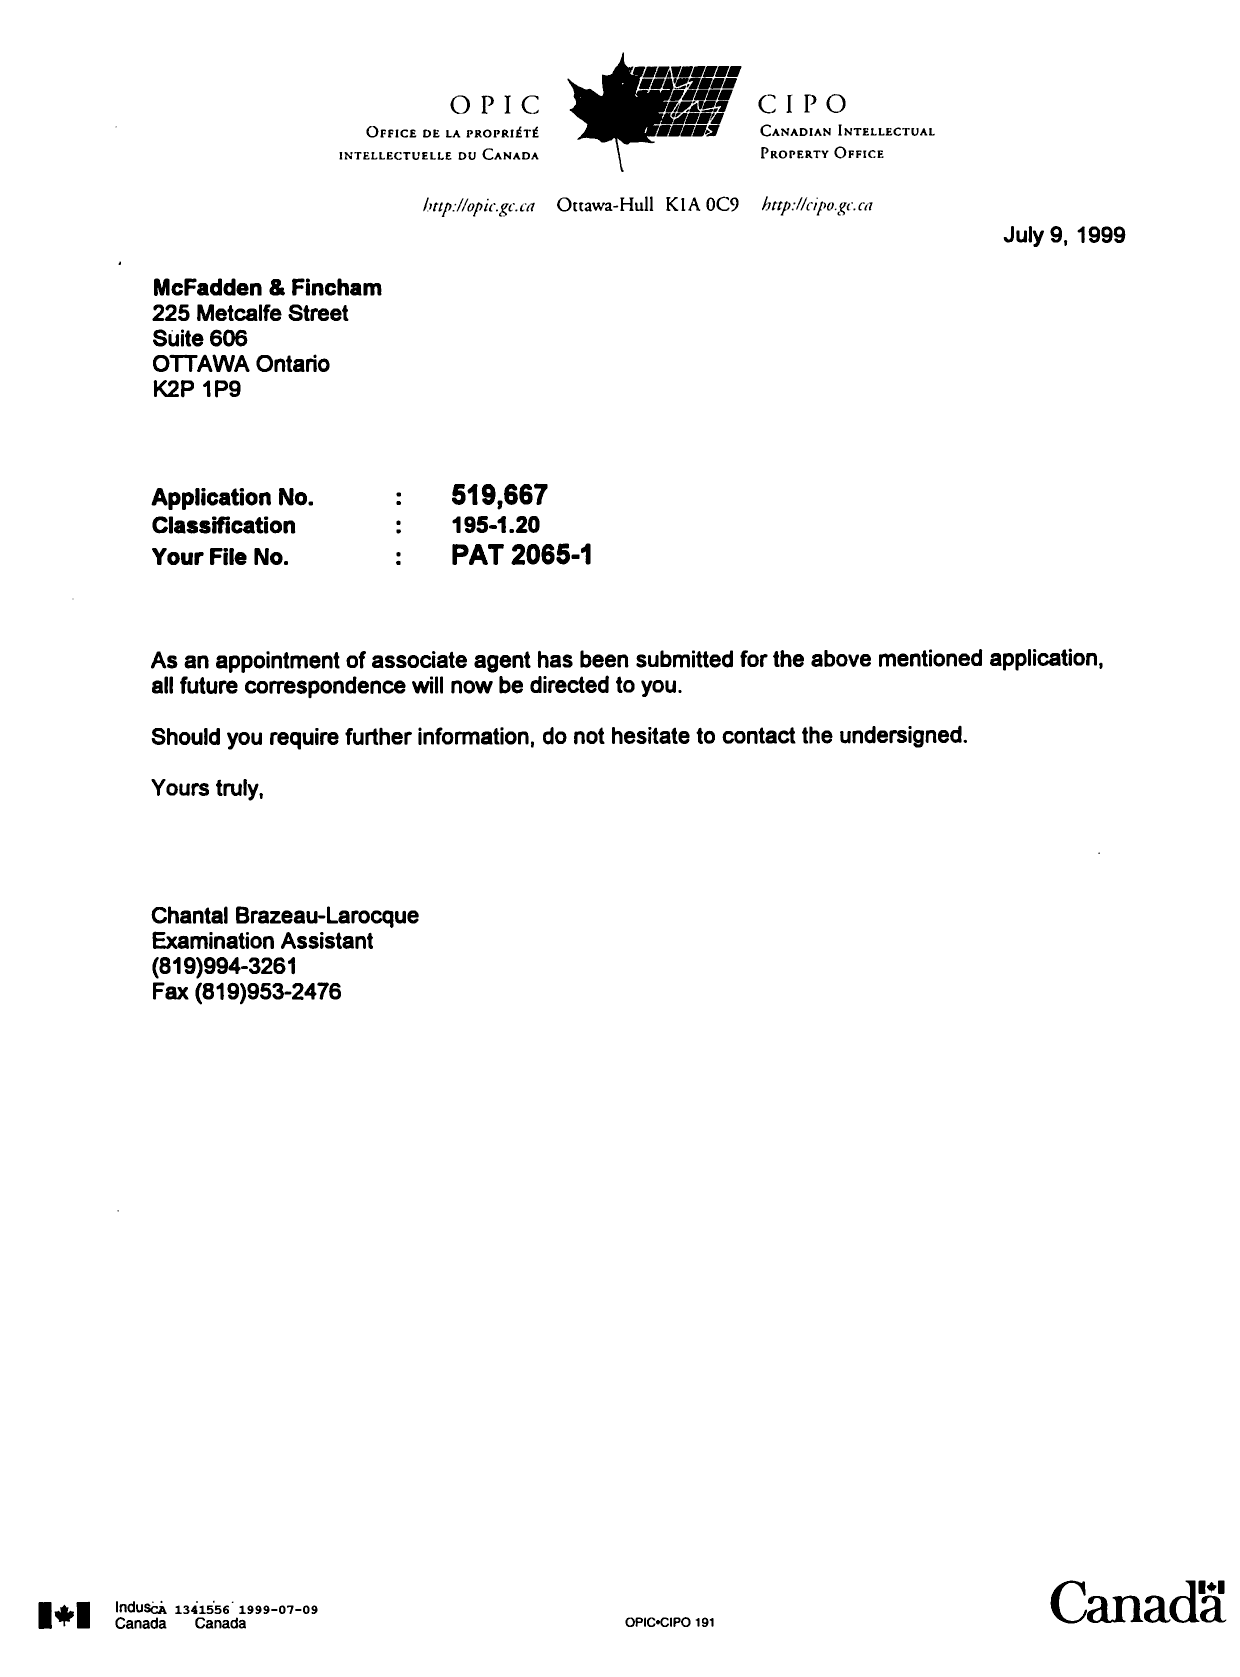 Canadian Patent Document 1341556. Office Letter 19990709. Image 1 of 1